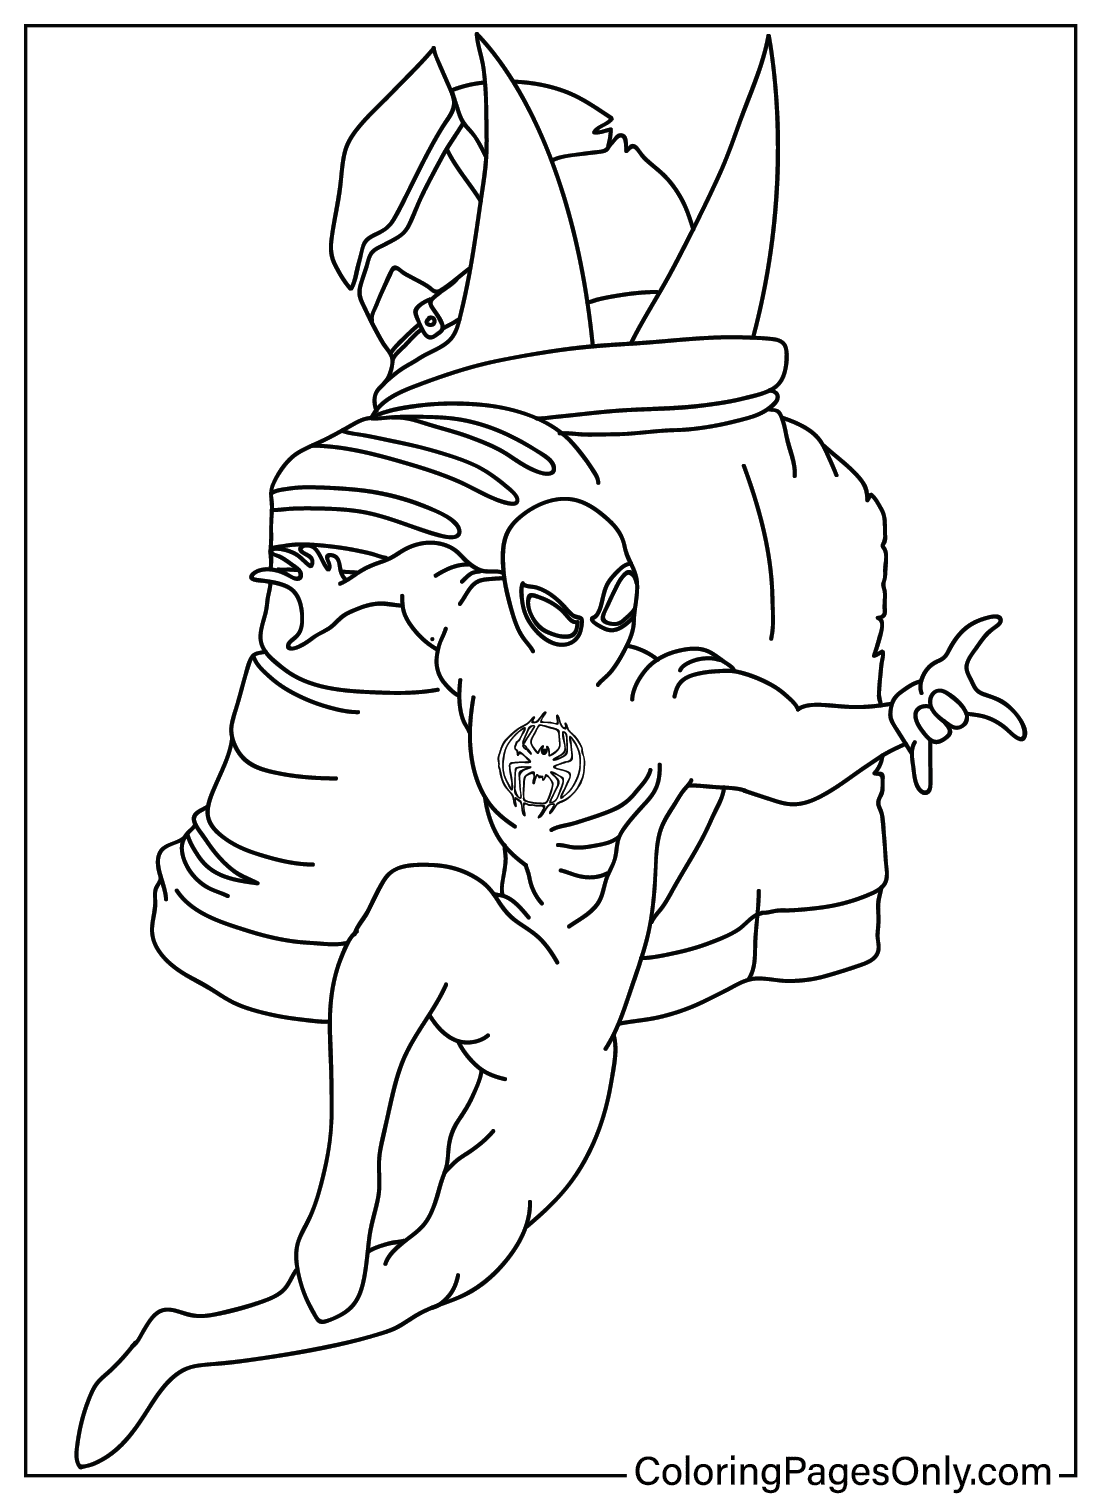 Spider-Man Across the Spider Coloring Page PNG